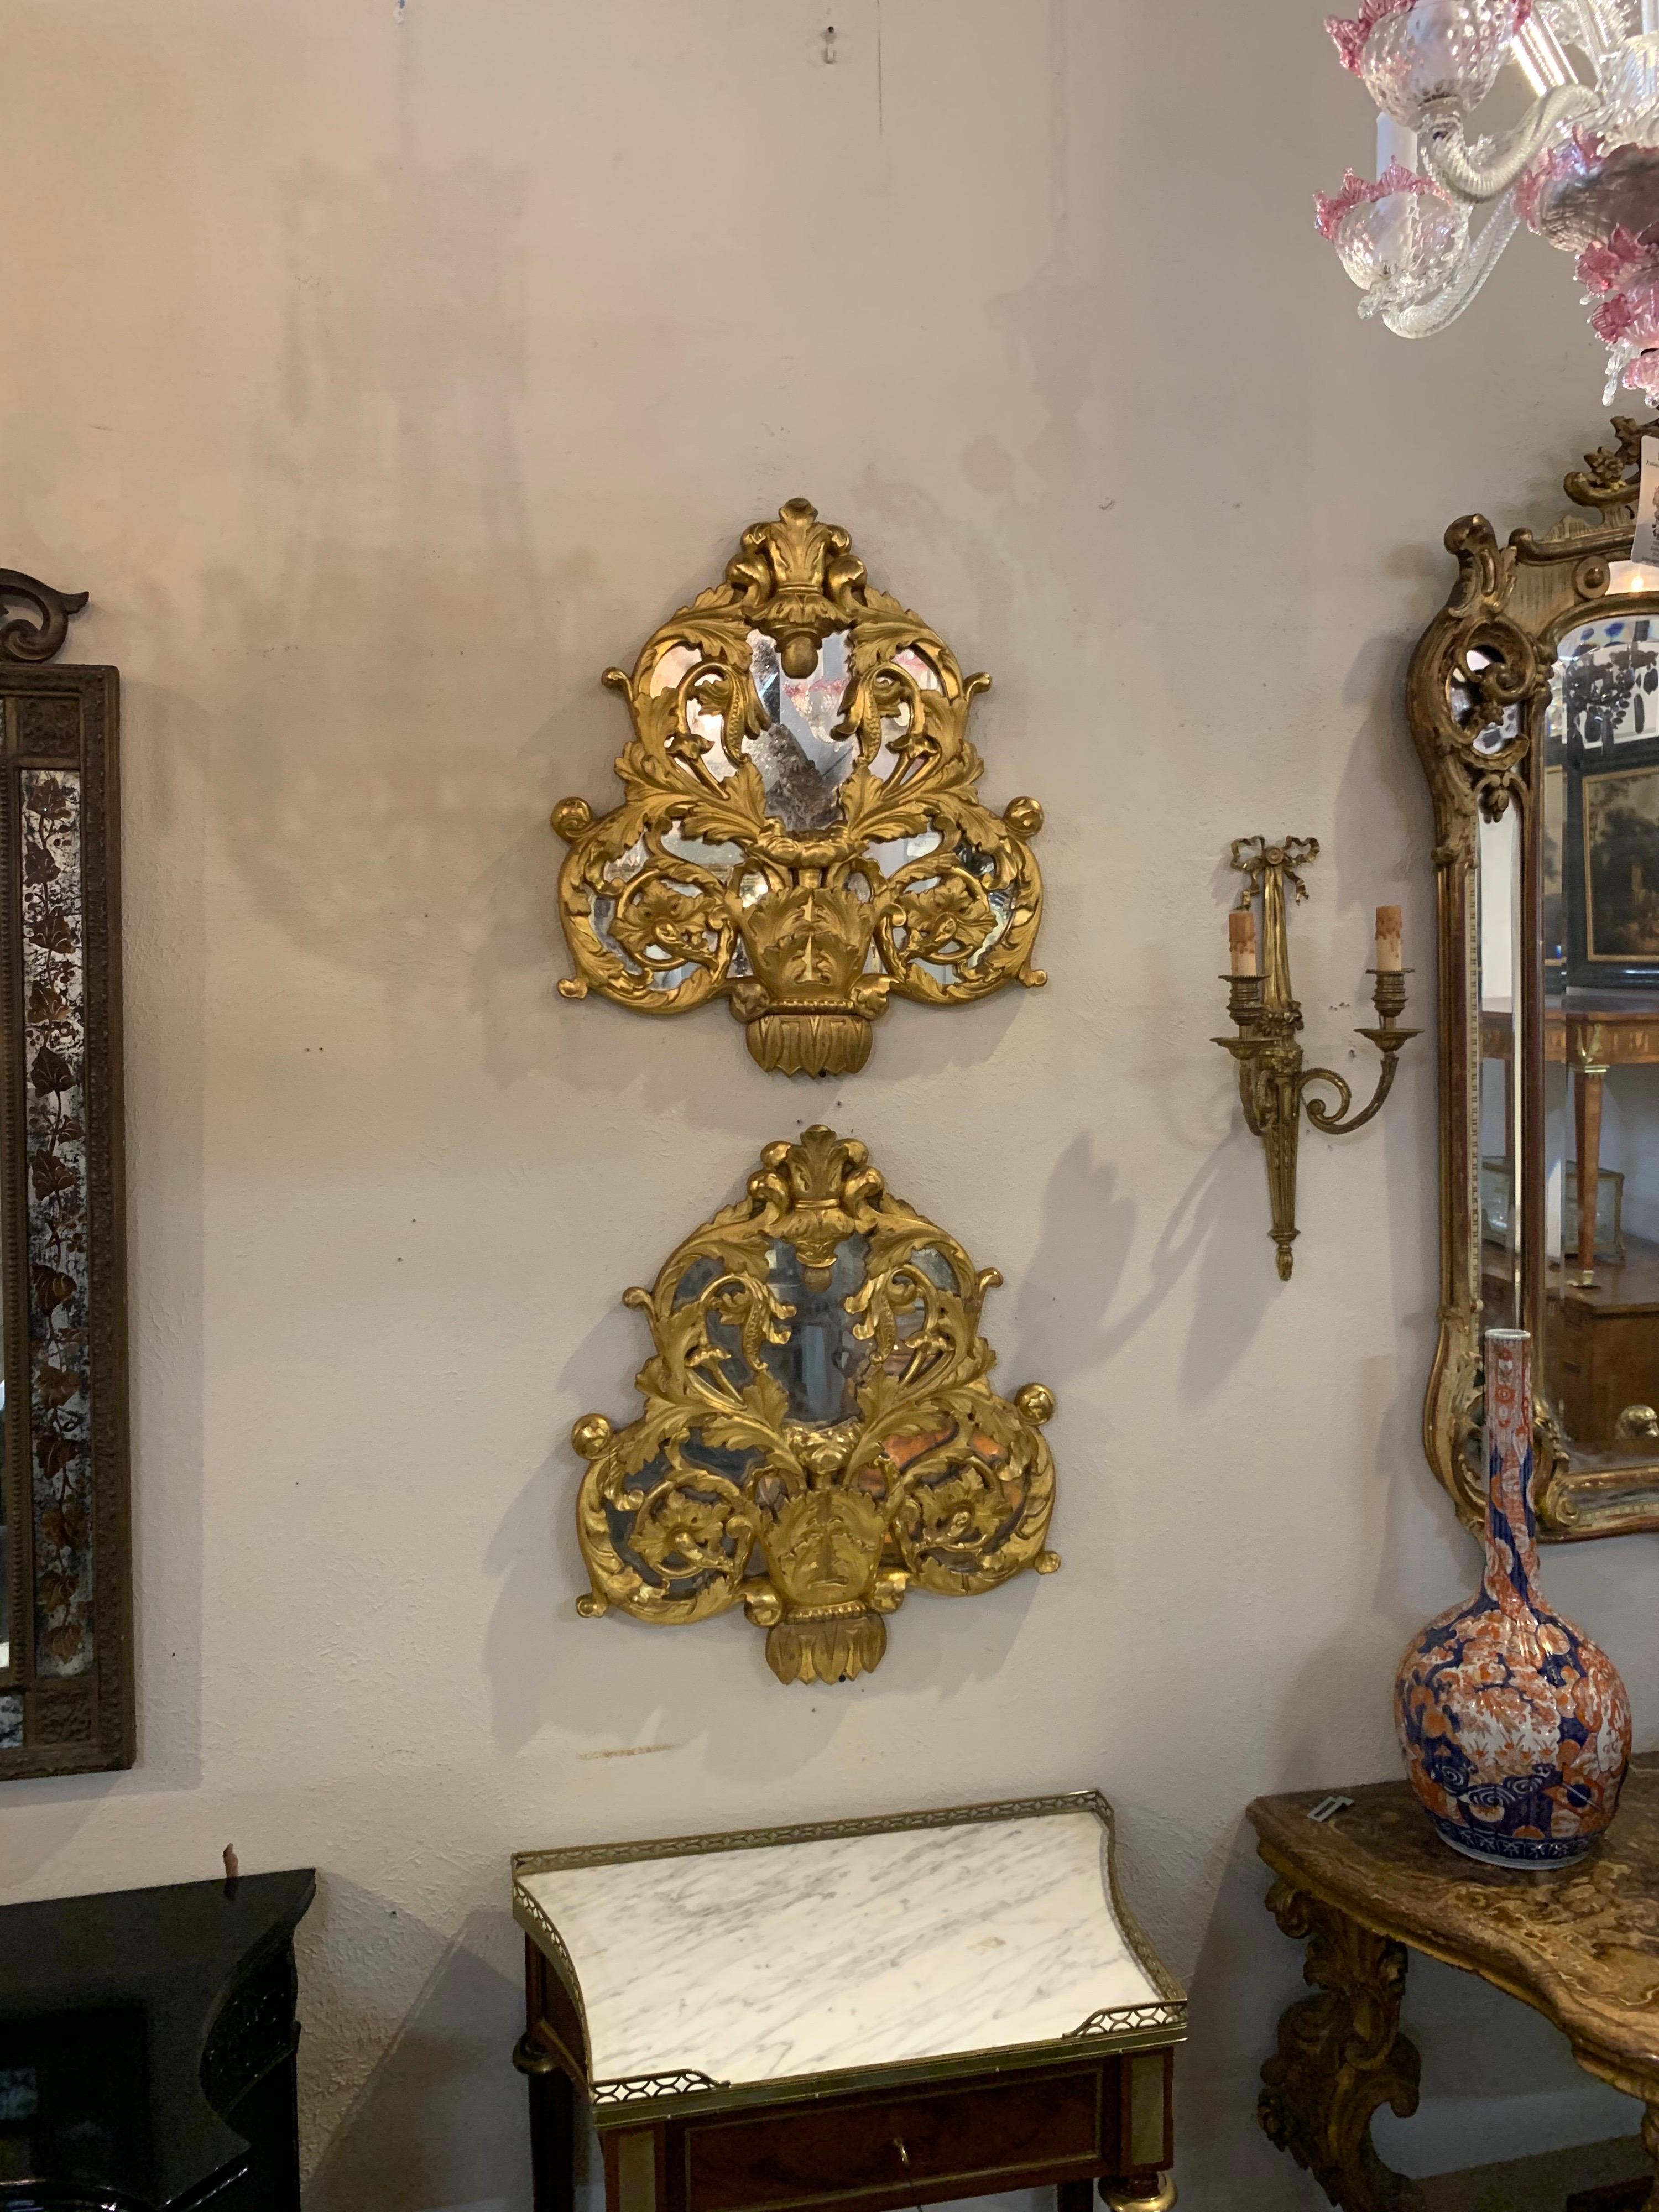 Decorative pair of early 19th century Italian carved and giltwood mirrors. Very fine gilt and carvings on these. Makes a gorgeous accessory!